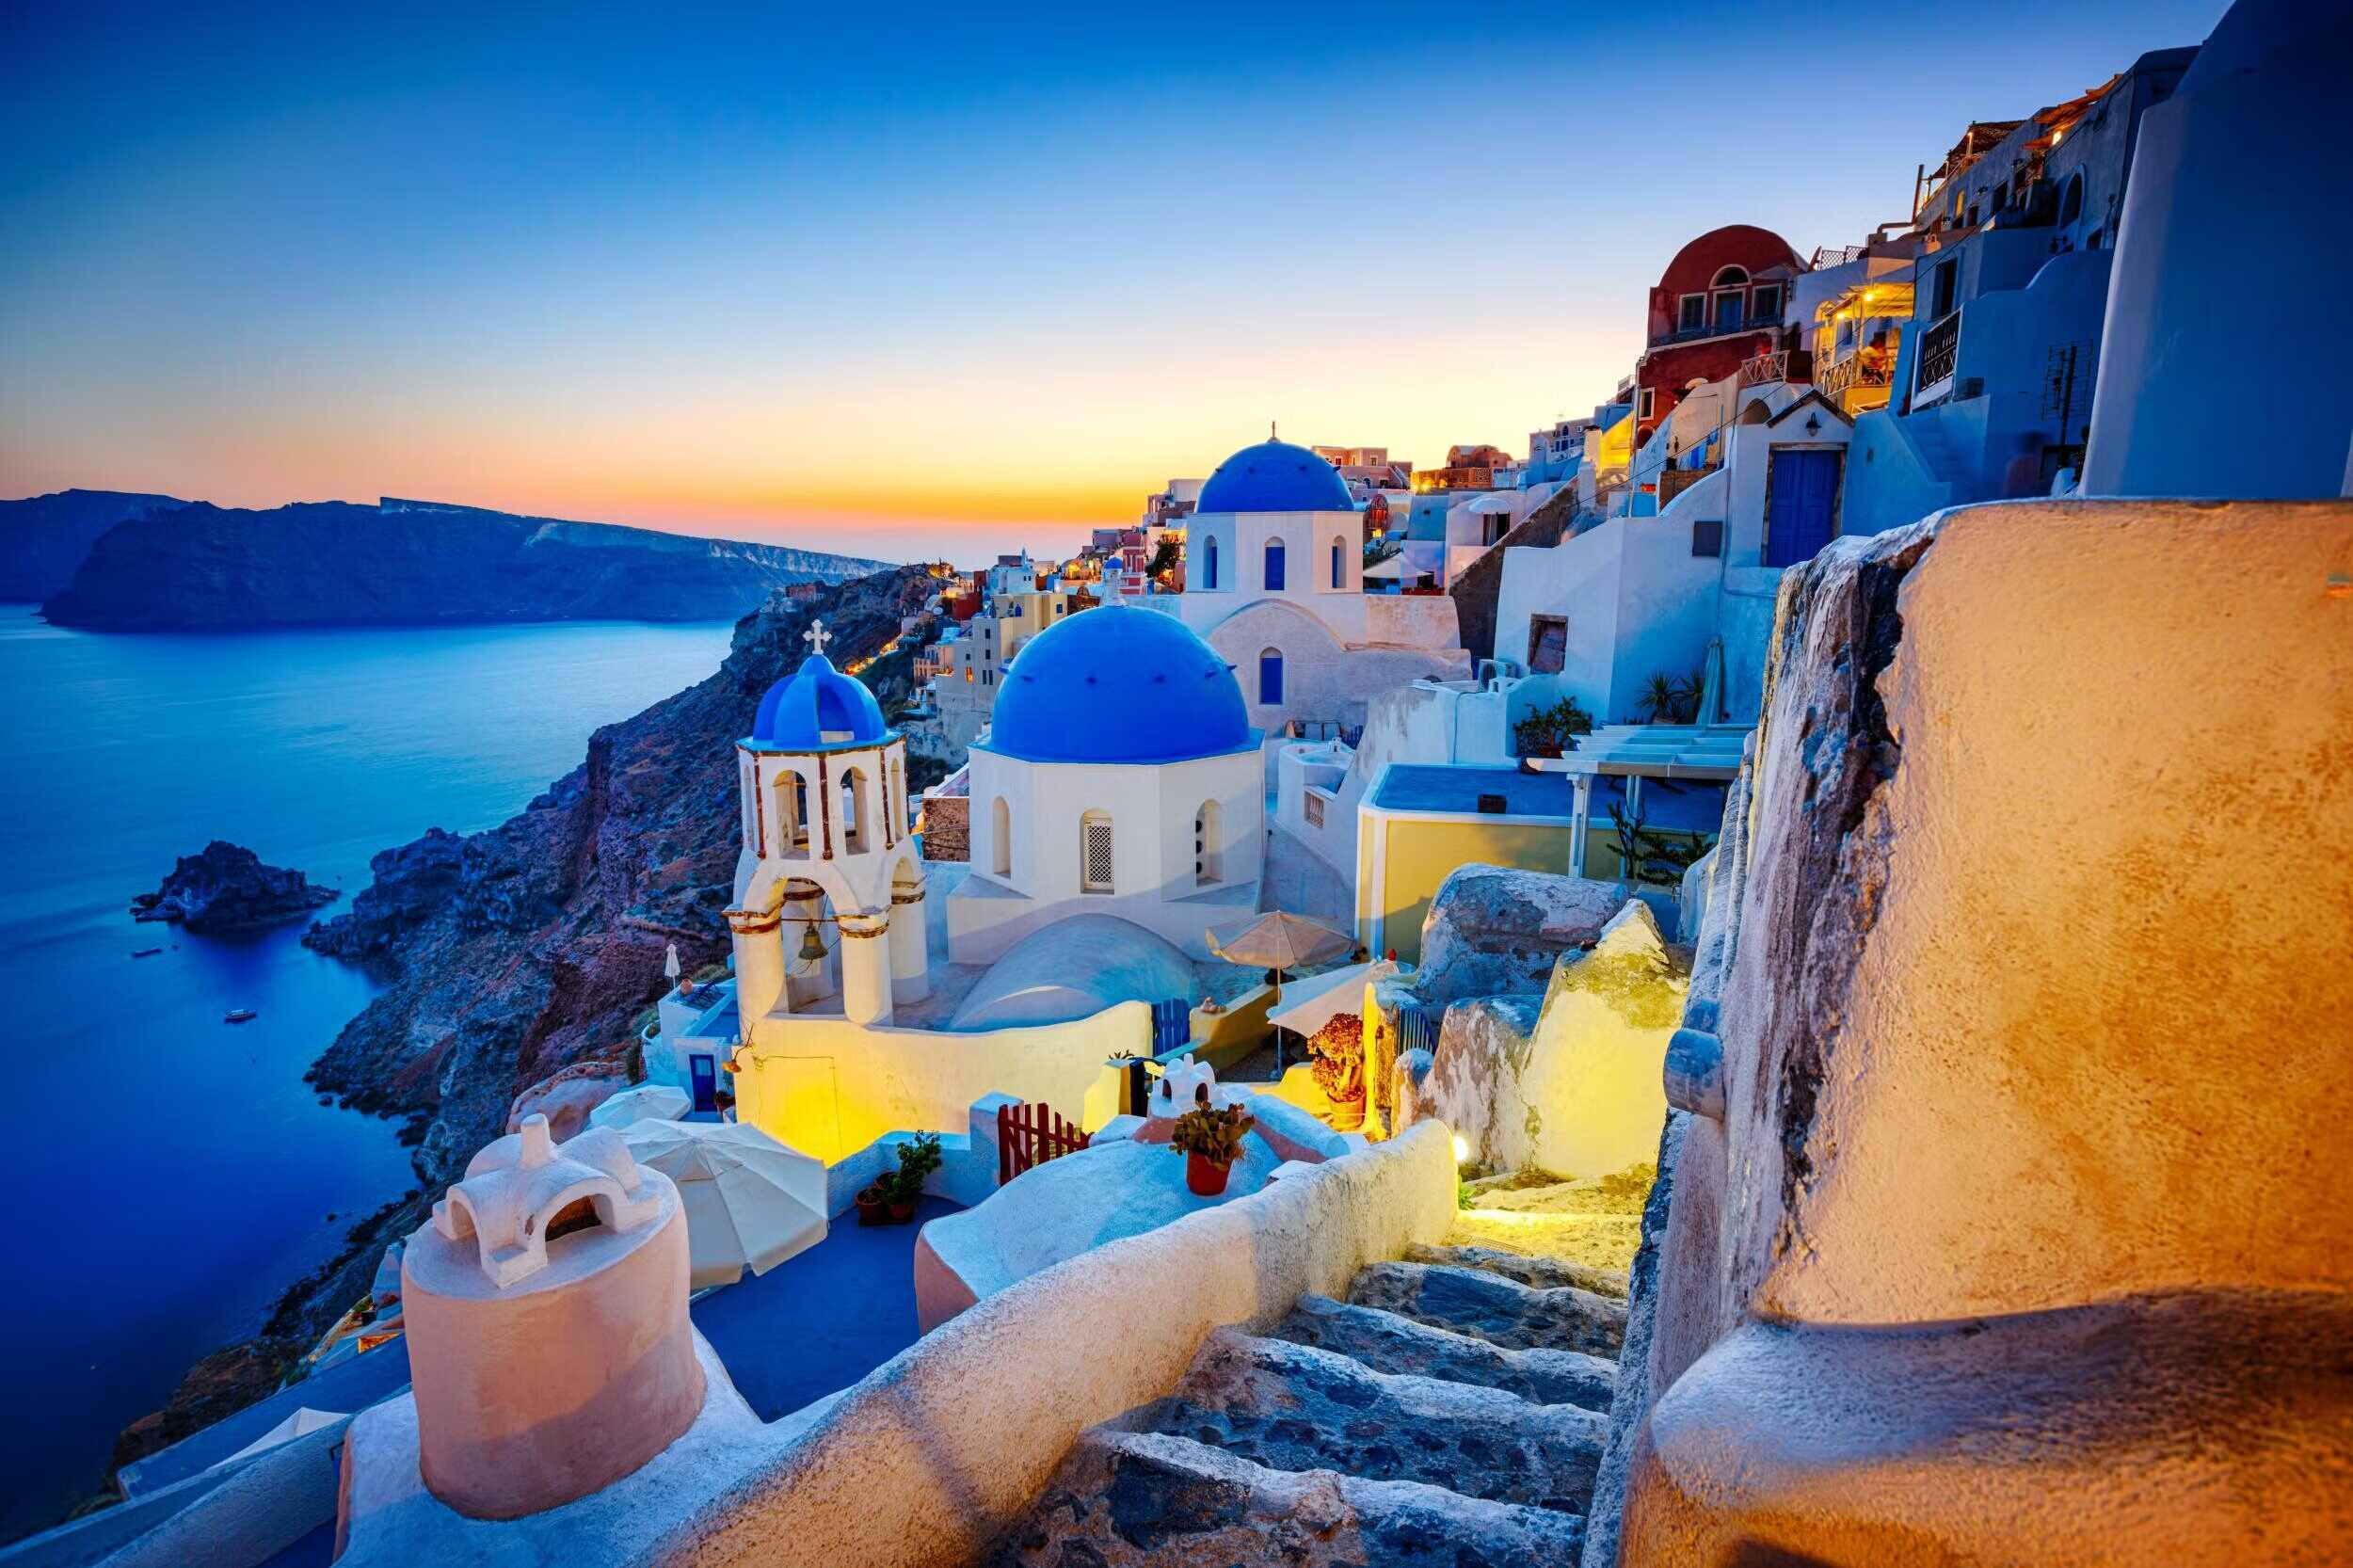 Where To Stay In Santorini For A Honeymoon – 12 Romantic Greek Island Hotels